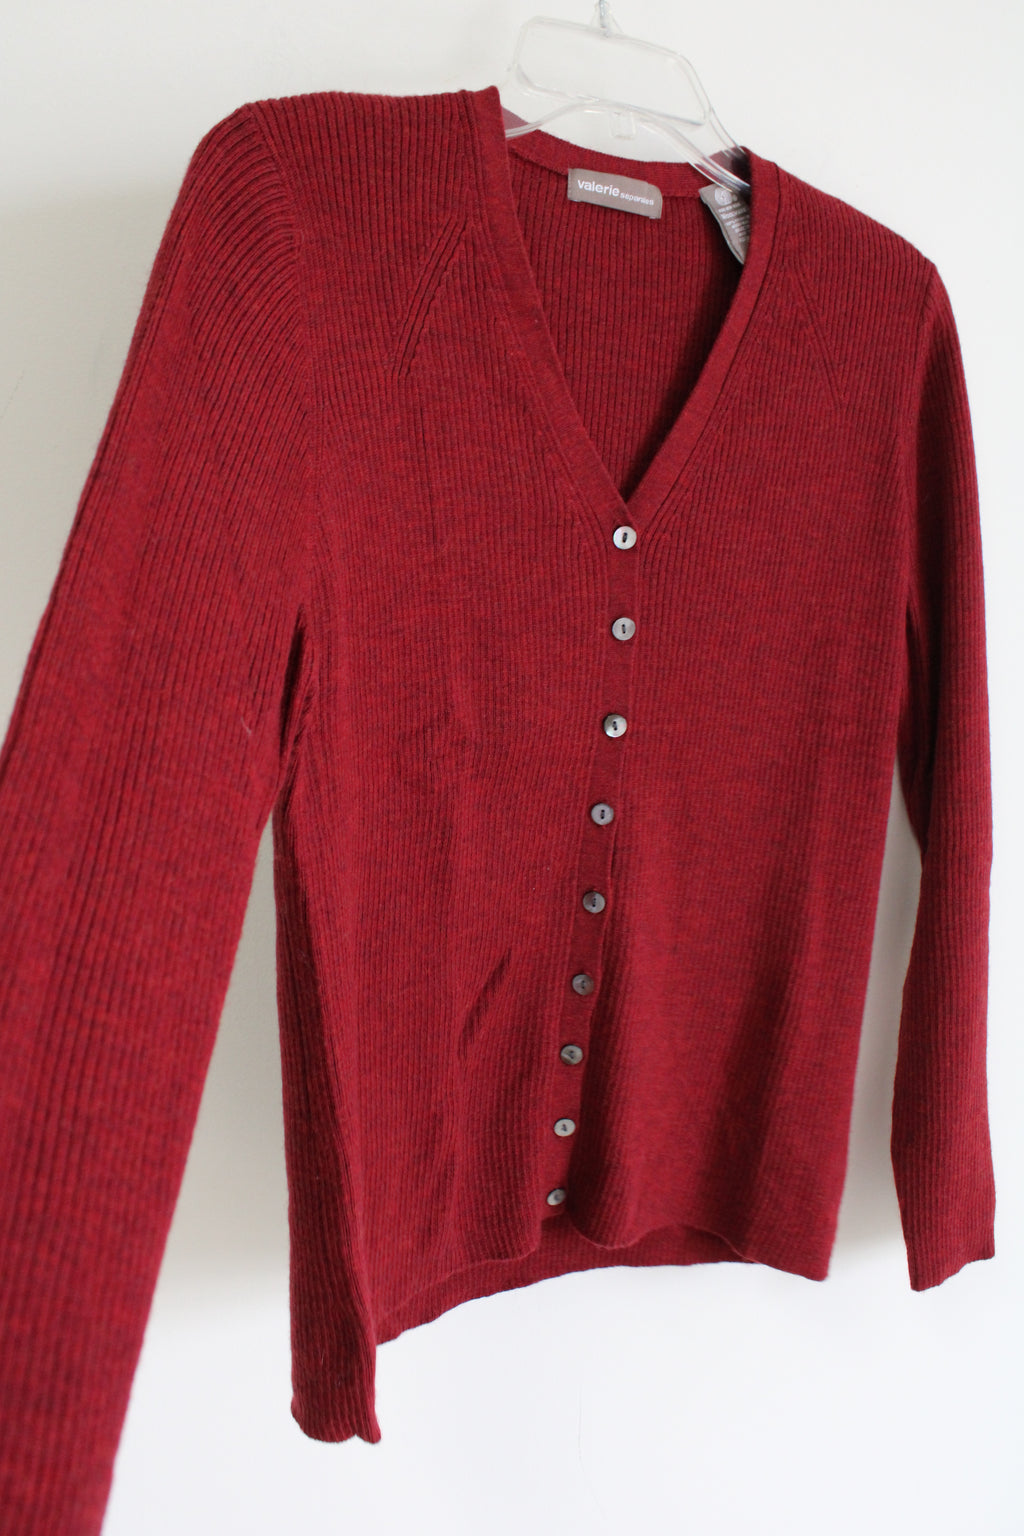 Valerie Essentials Extra Fine Merino Wool Red Ribbed Sweater | L